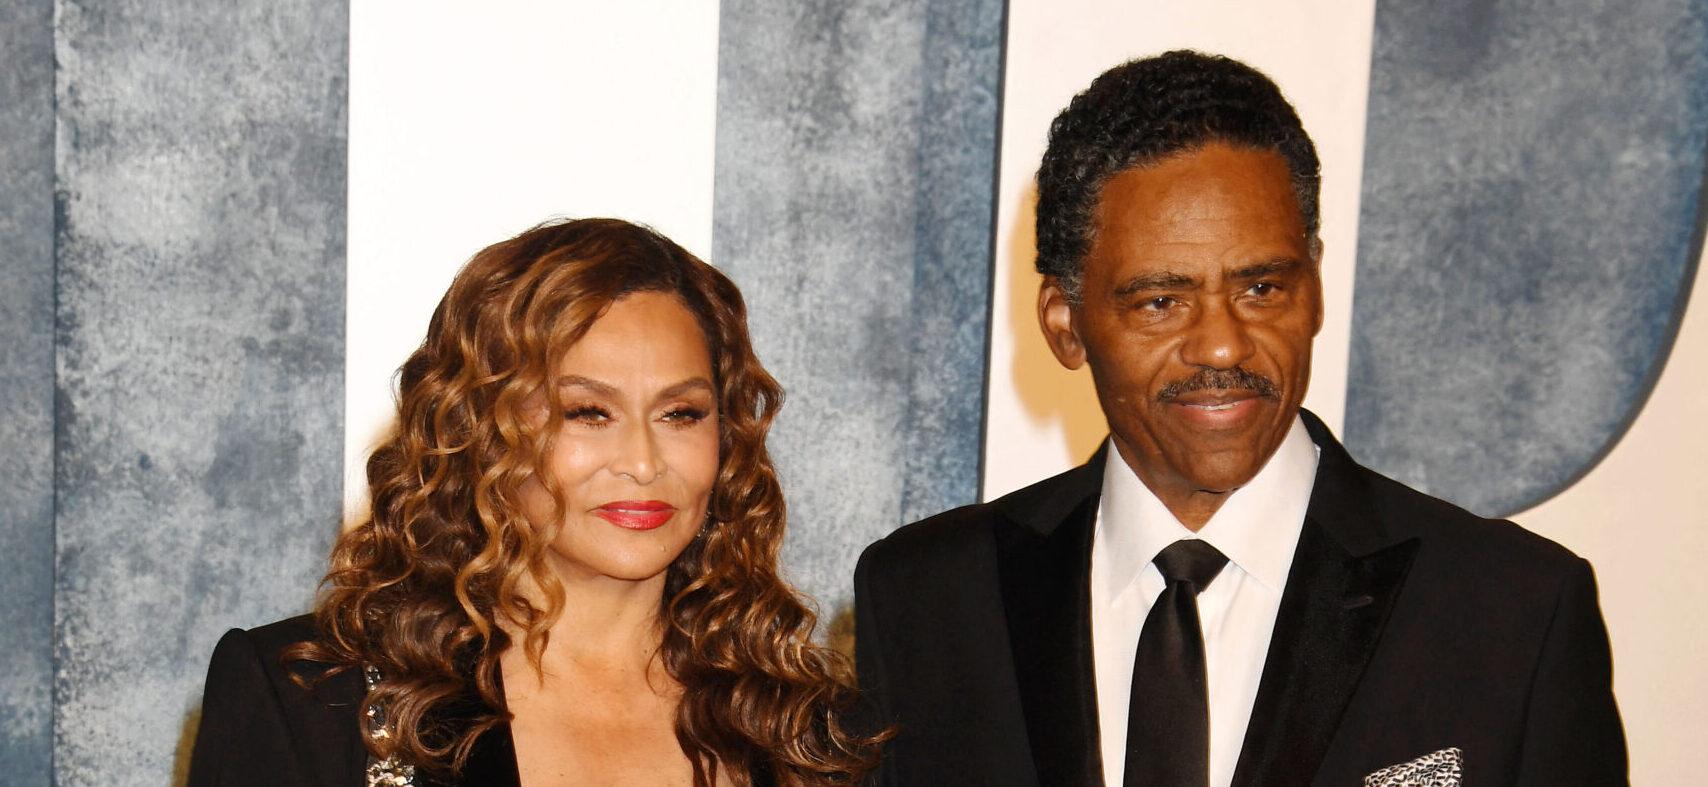 Tina Knowles Breaks Silence To Address Reason For Richard Lawson Divorce: ‘Only God Is Perfect’